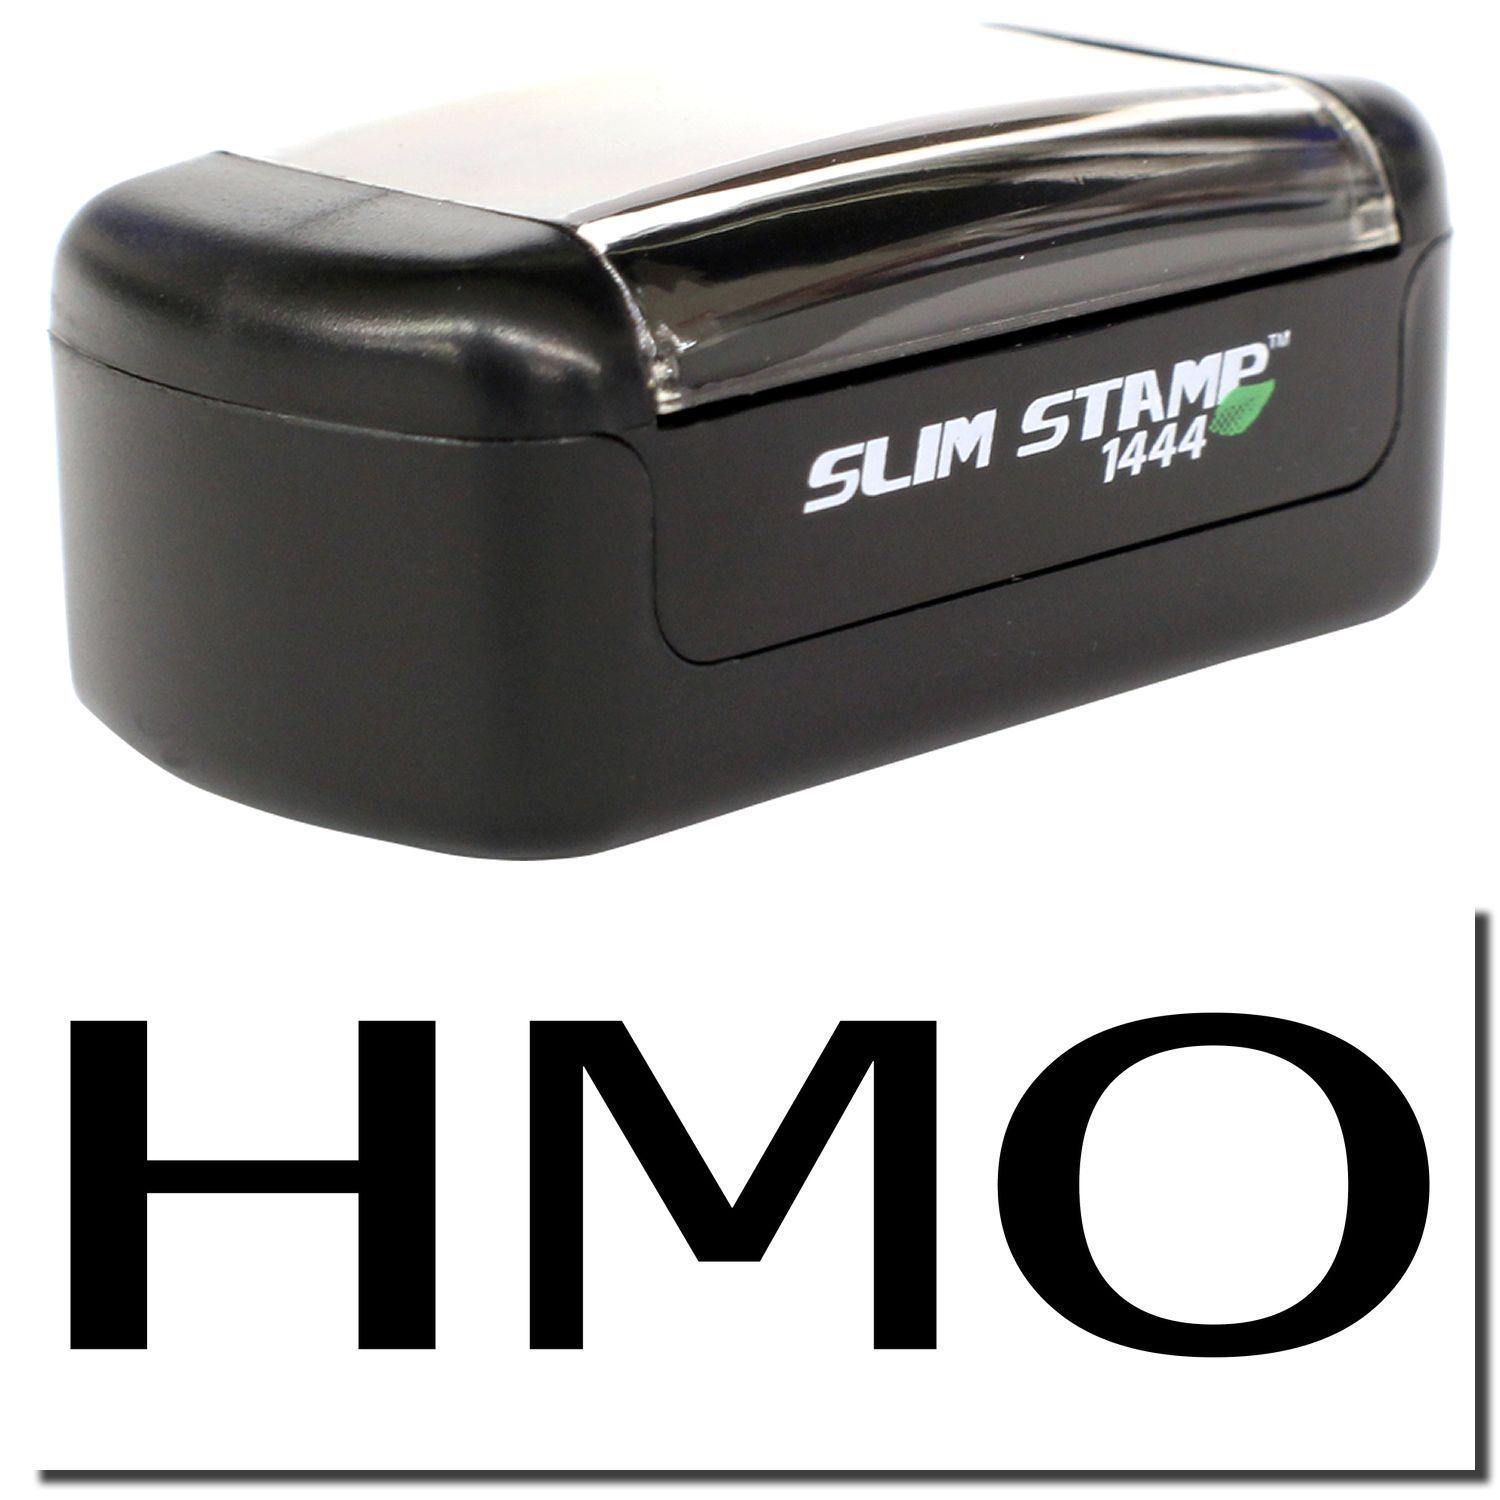 A stock office pre-inked stamp with a stamped image showing how the text "HMO" is displayed after stamping.